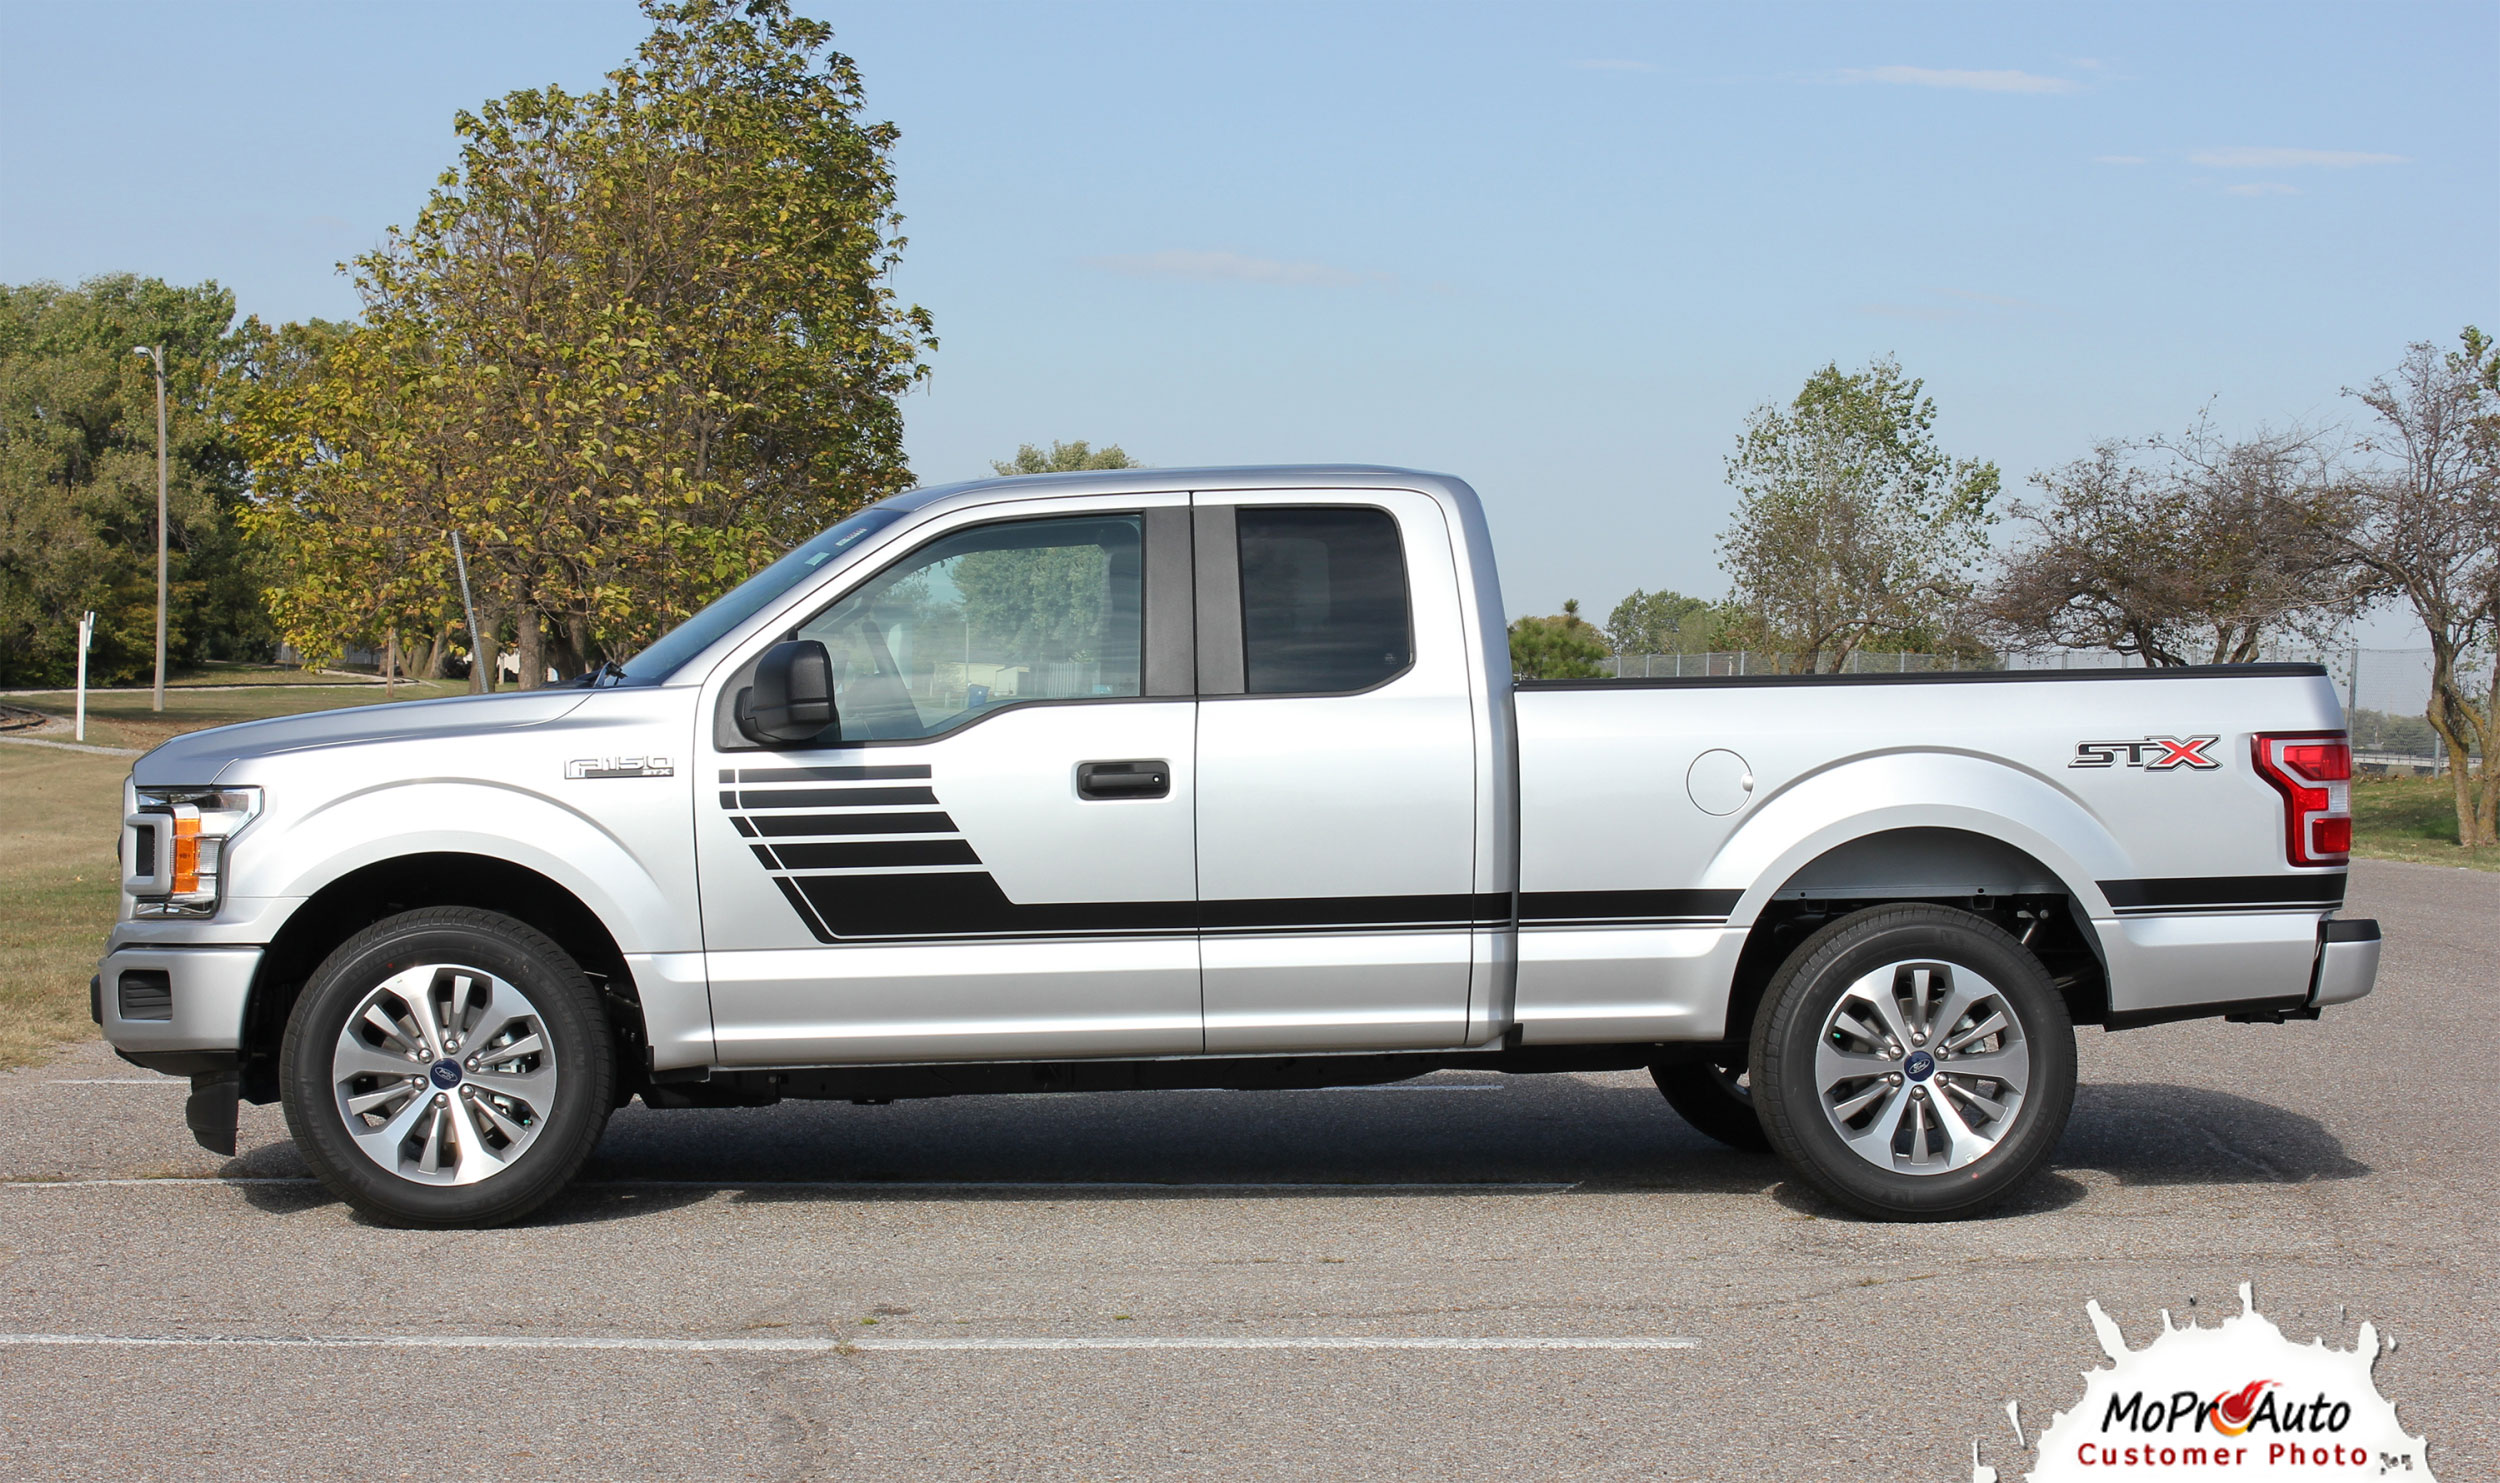 2021, 2022, 2023 SPEEDWAY Special Edition Ford F-Series F-150 Door Hockey Stick Appearance Package Vinyl Graphics and Decals Kit by MoProAuto Pro Design Series